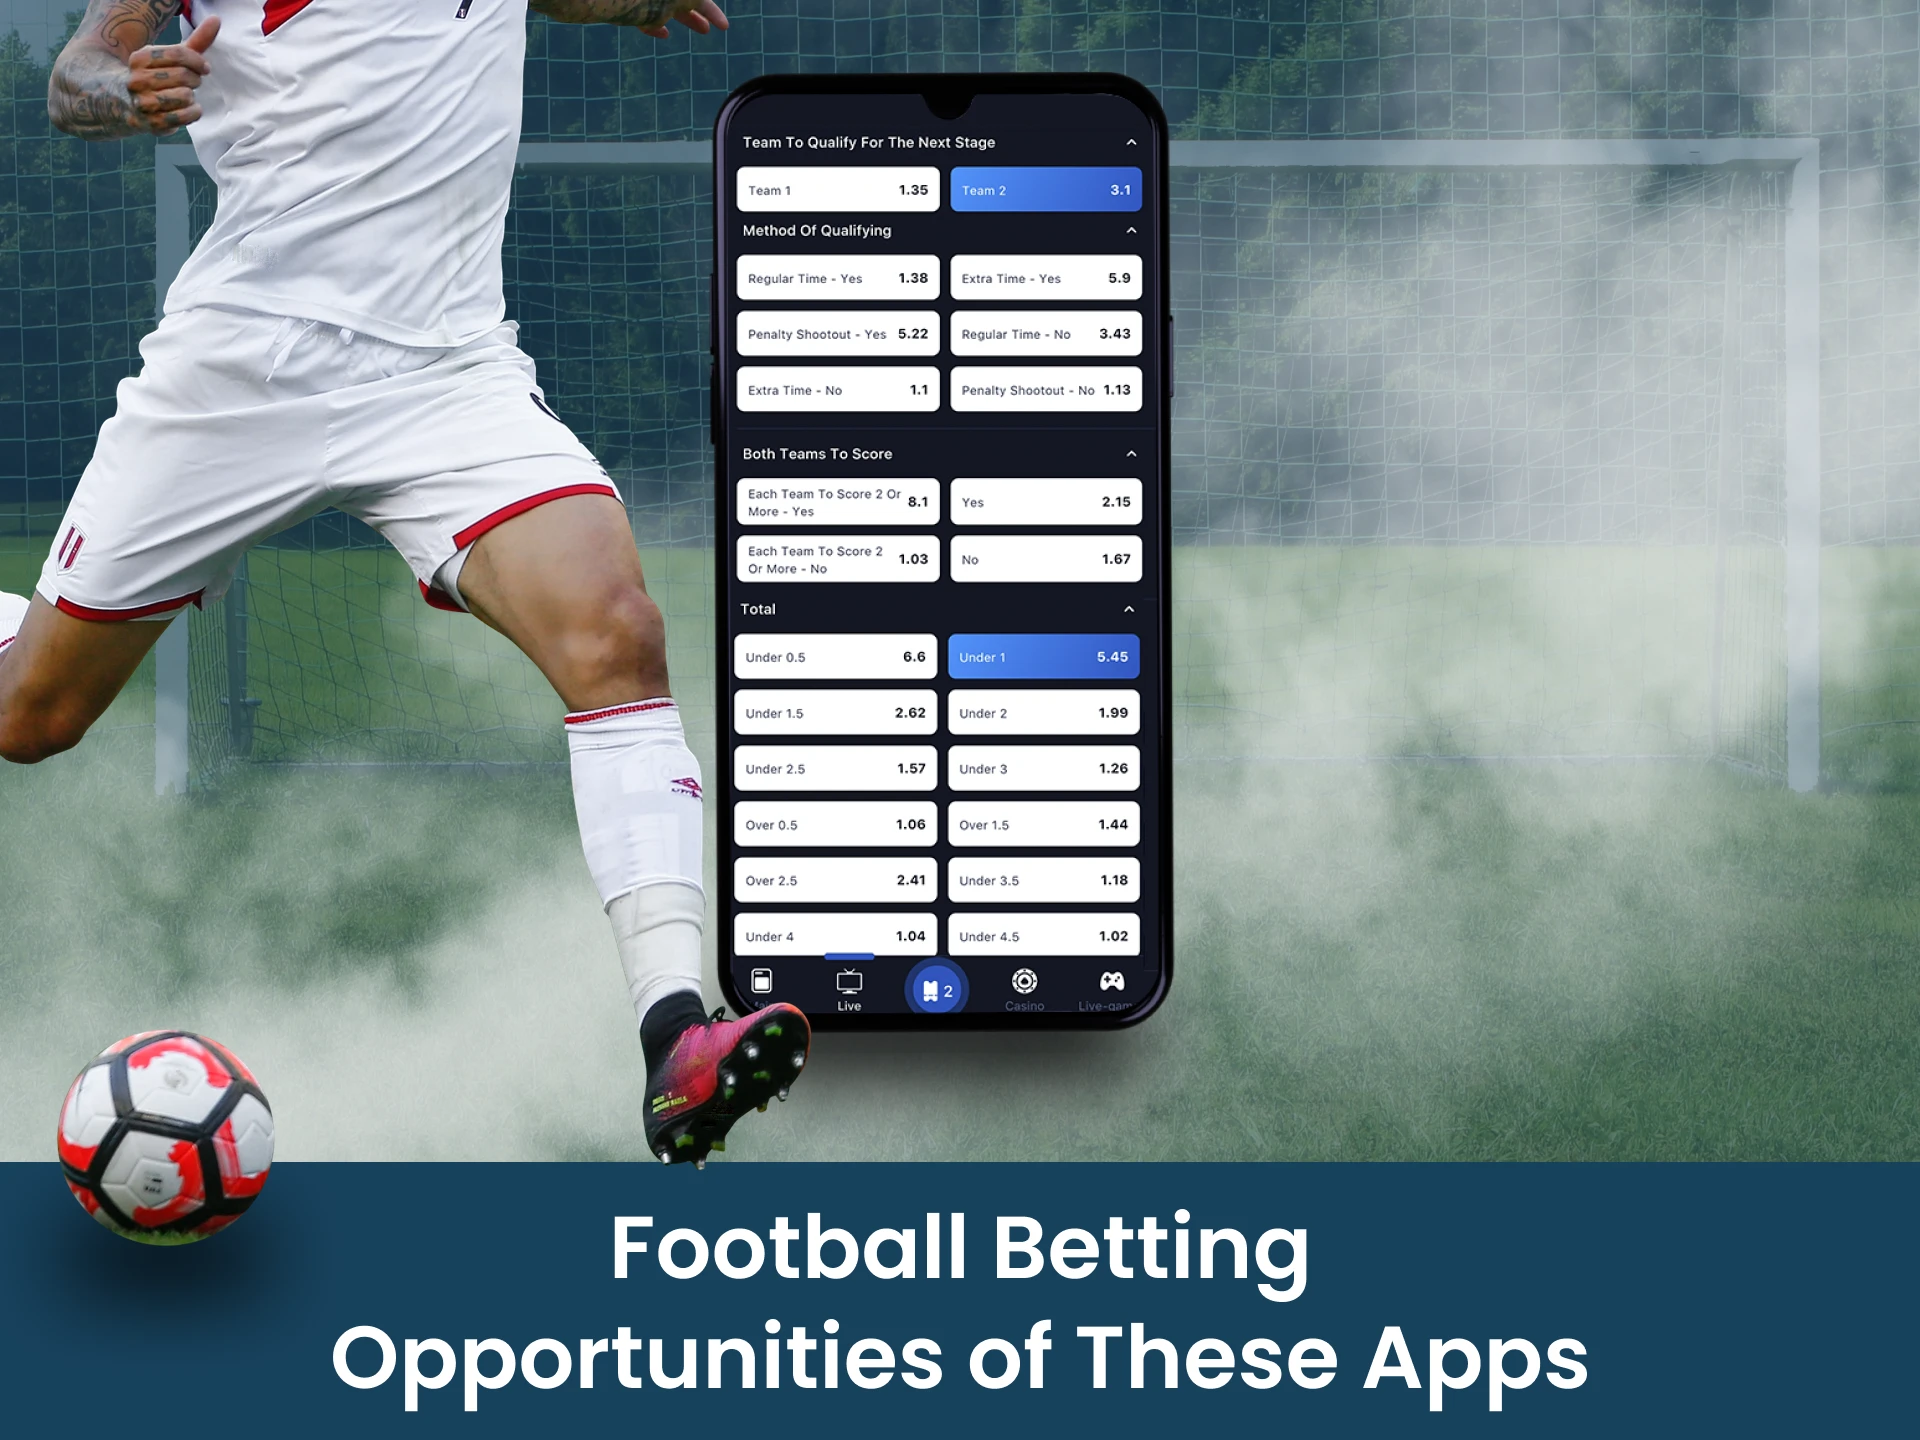 Football betting apps have all the same features as the sites do.